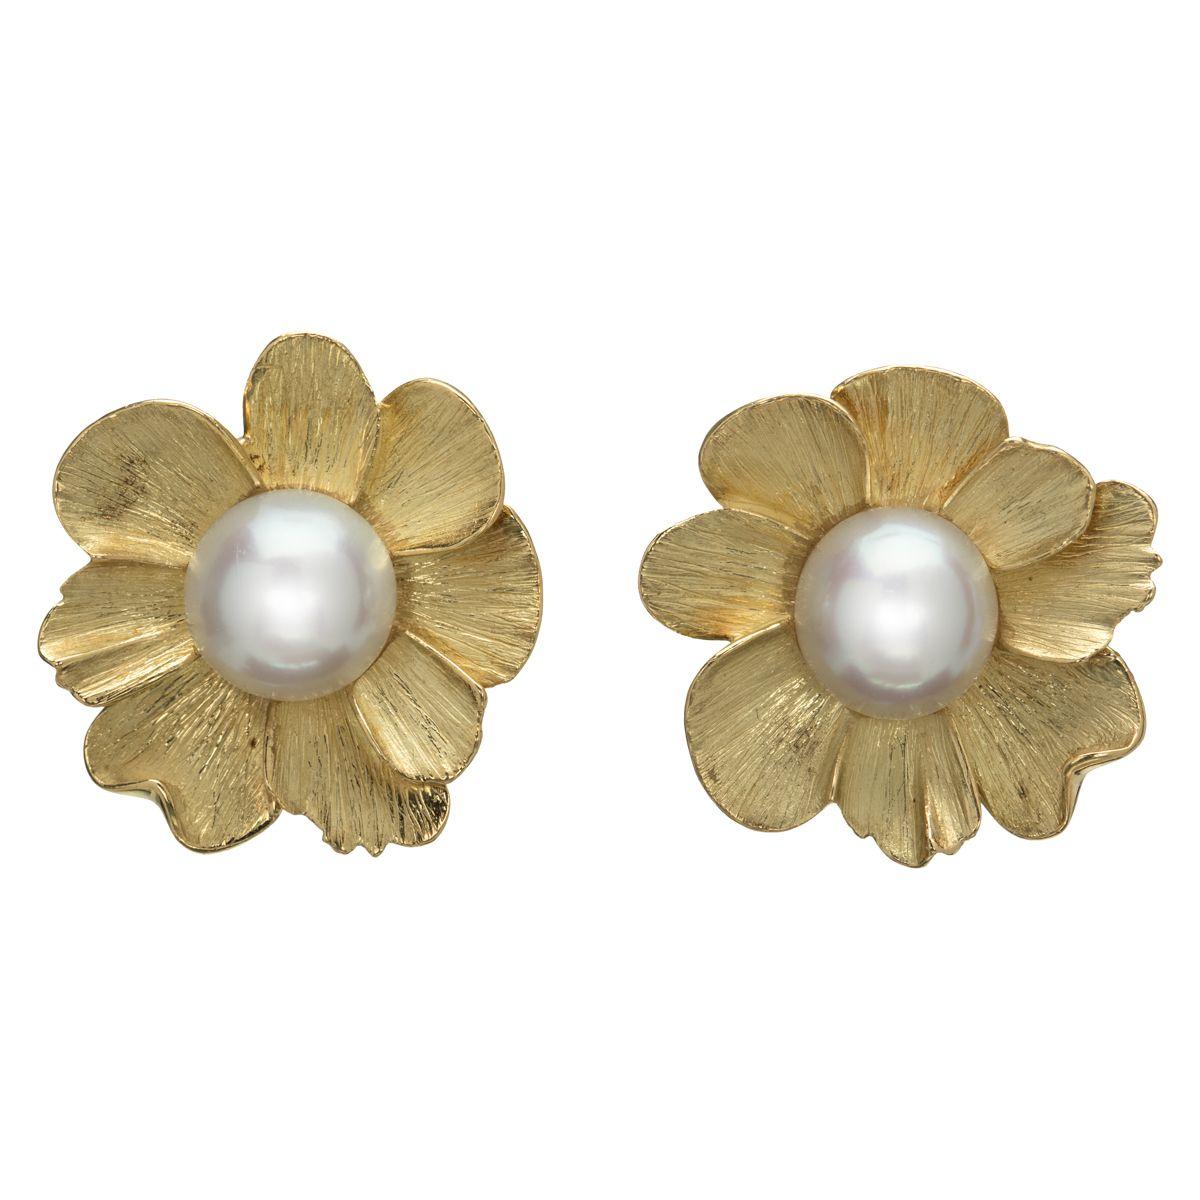 A Nature inspired creation, these 18k yellow gold earrings are matte finished and feature intricately hand-fashioned petals, forming a flower with a bright white South Sea pearl in the center to complete the wondrous design. A simple and elegant set